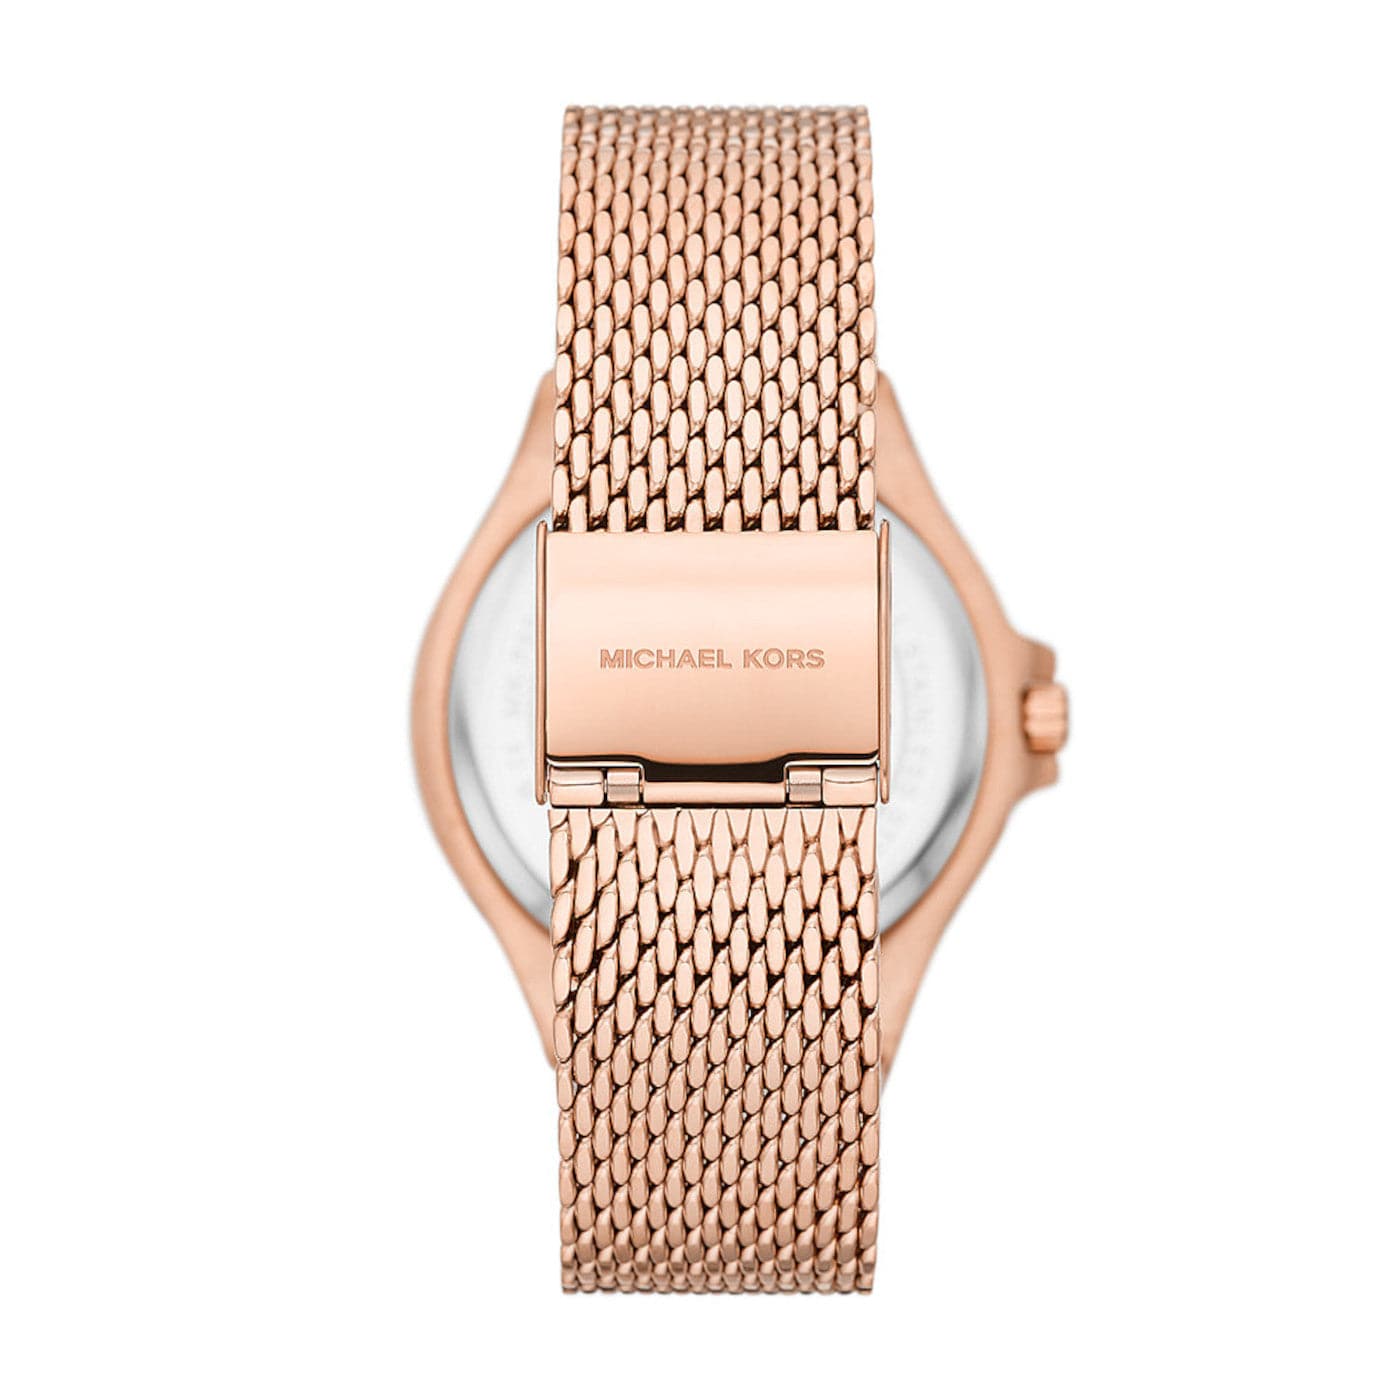 Michael Kors Lennox 37 mm Rose Gold Dial Stainless Steel Analog Watch for Women - MK7336I - Kamal Watch Company